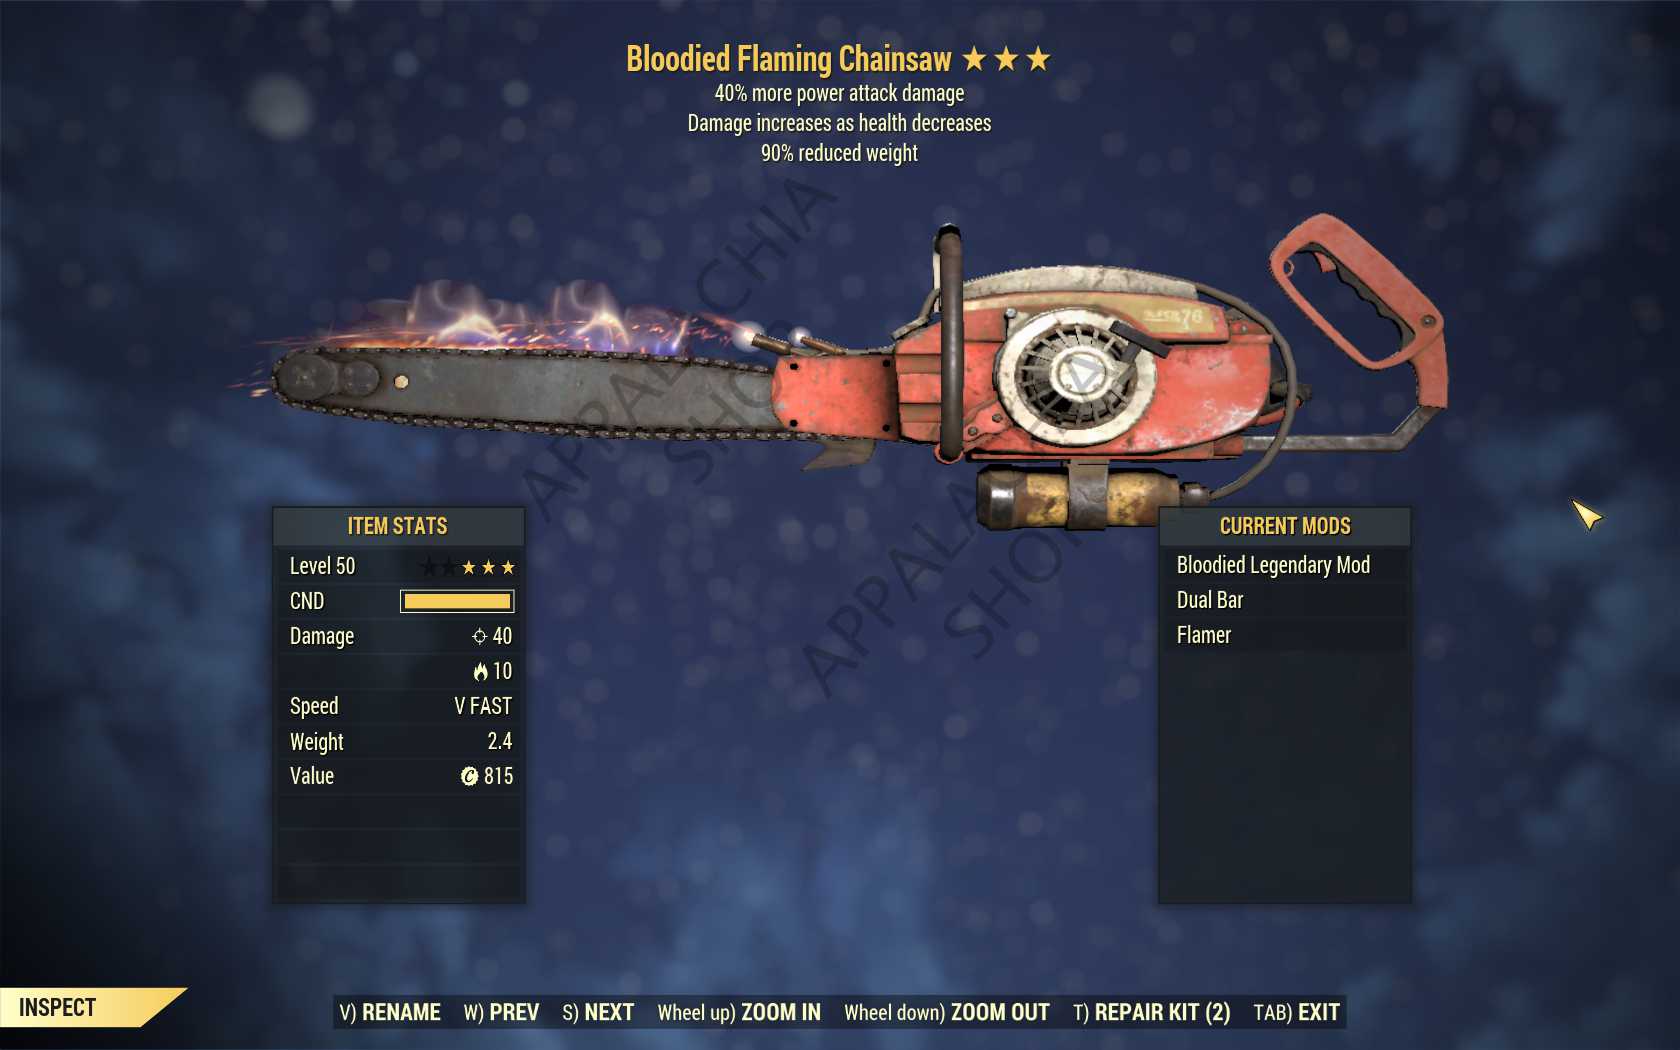 Bloodied Chainsaw (+40% damage PA, 90% reduced weight)